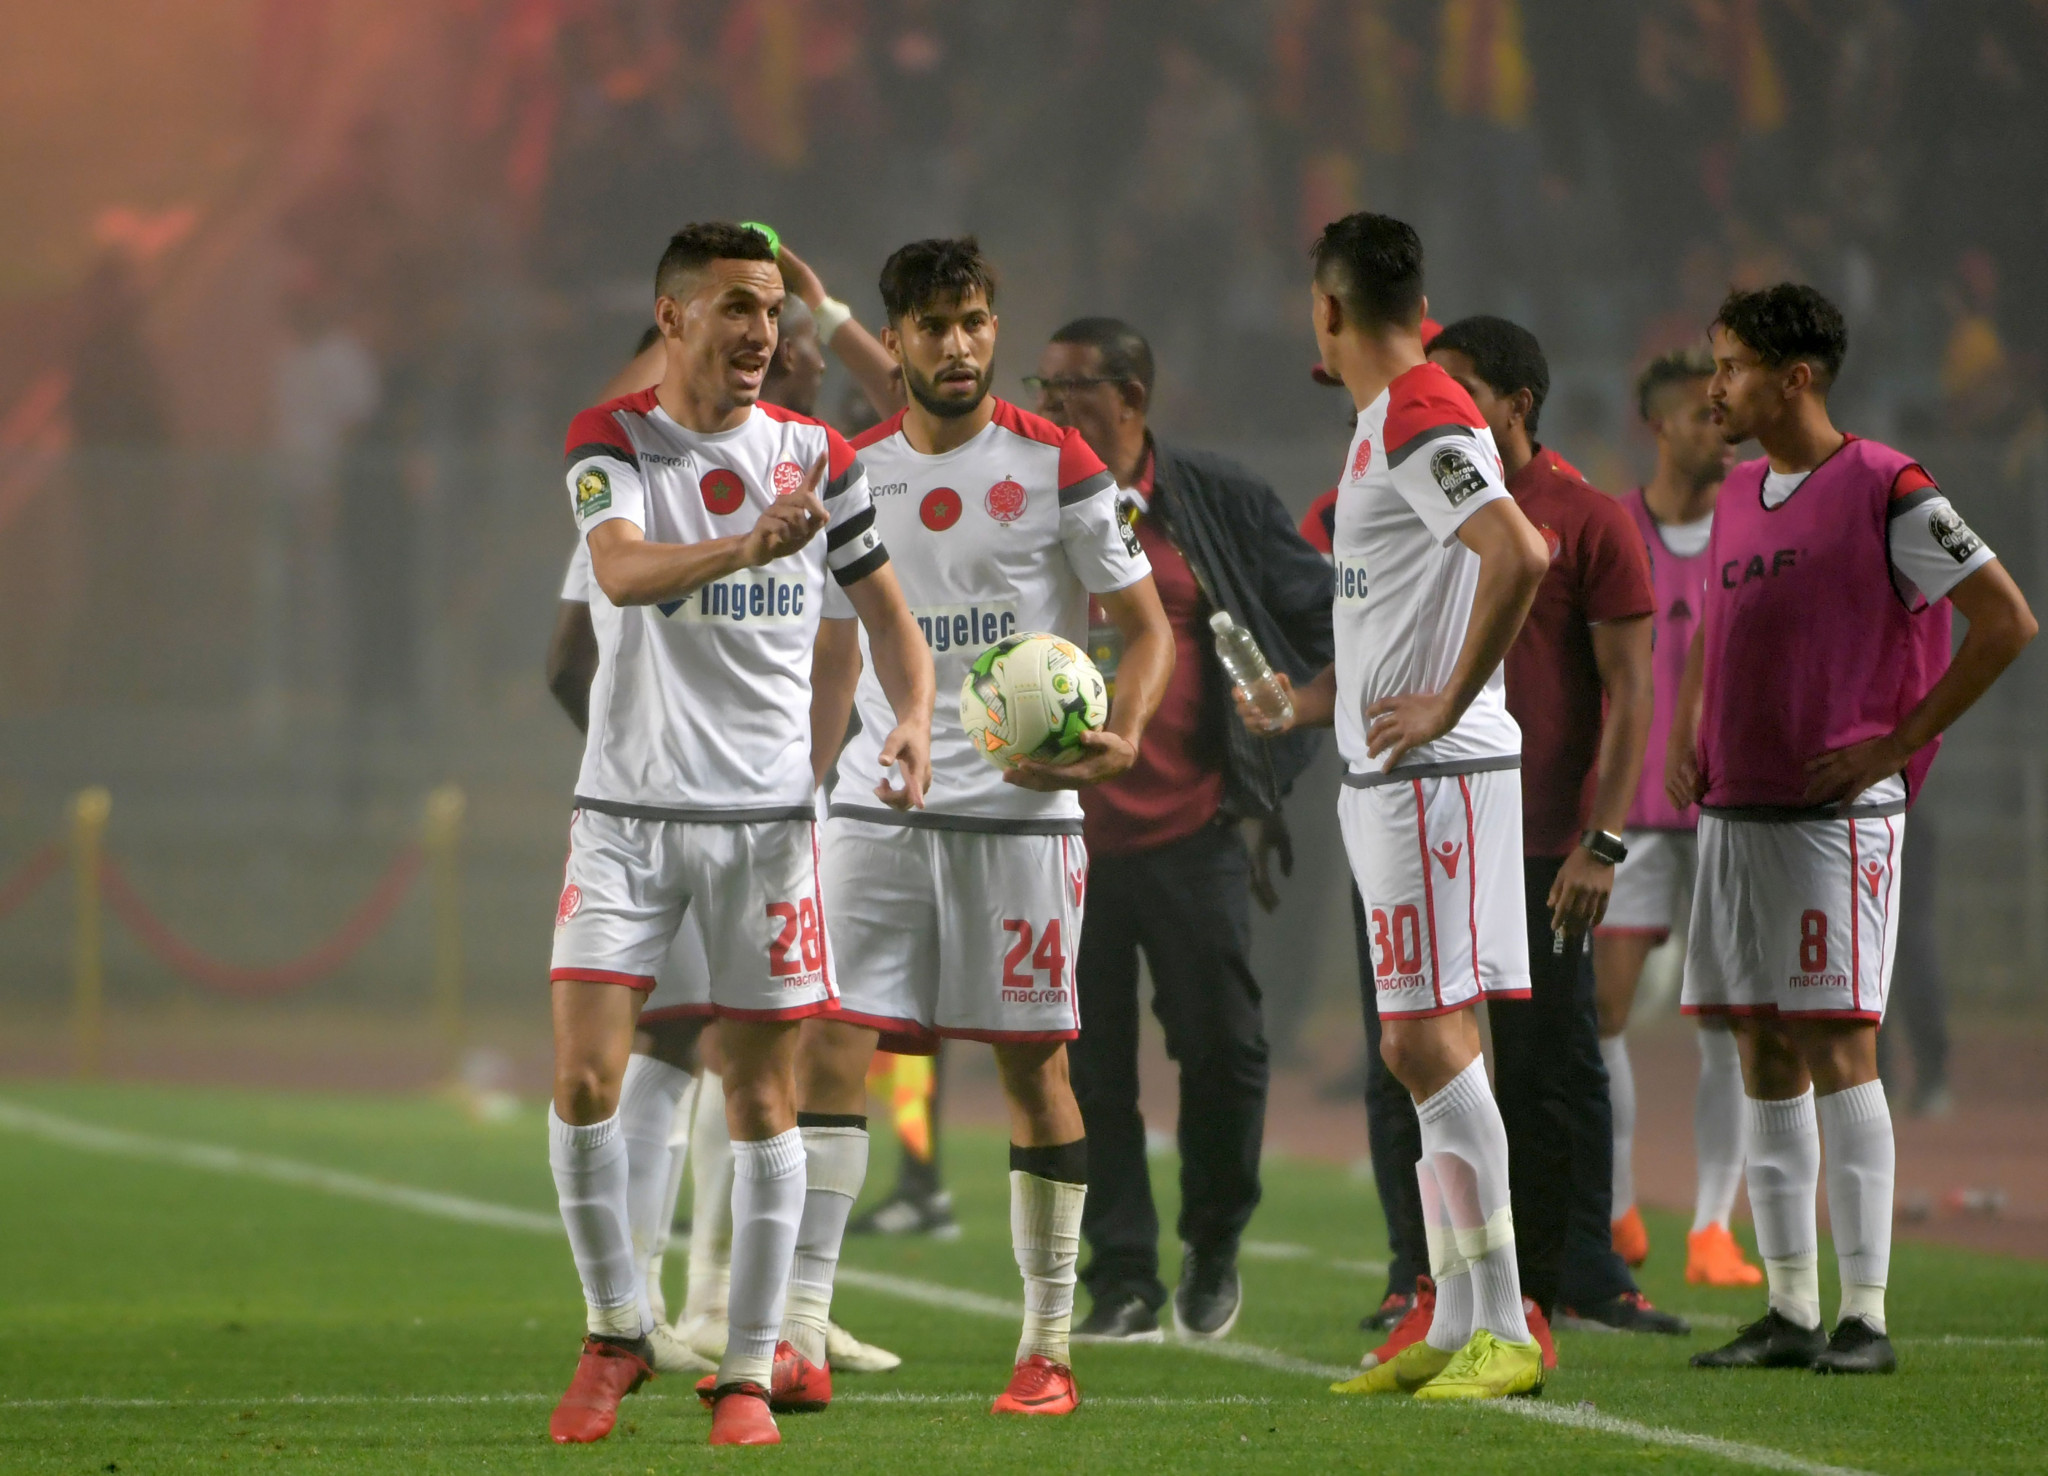 Wydad Casablanca's players refused to continue the match and Esperance were awarded the victory ©Getty Images